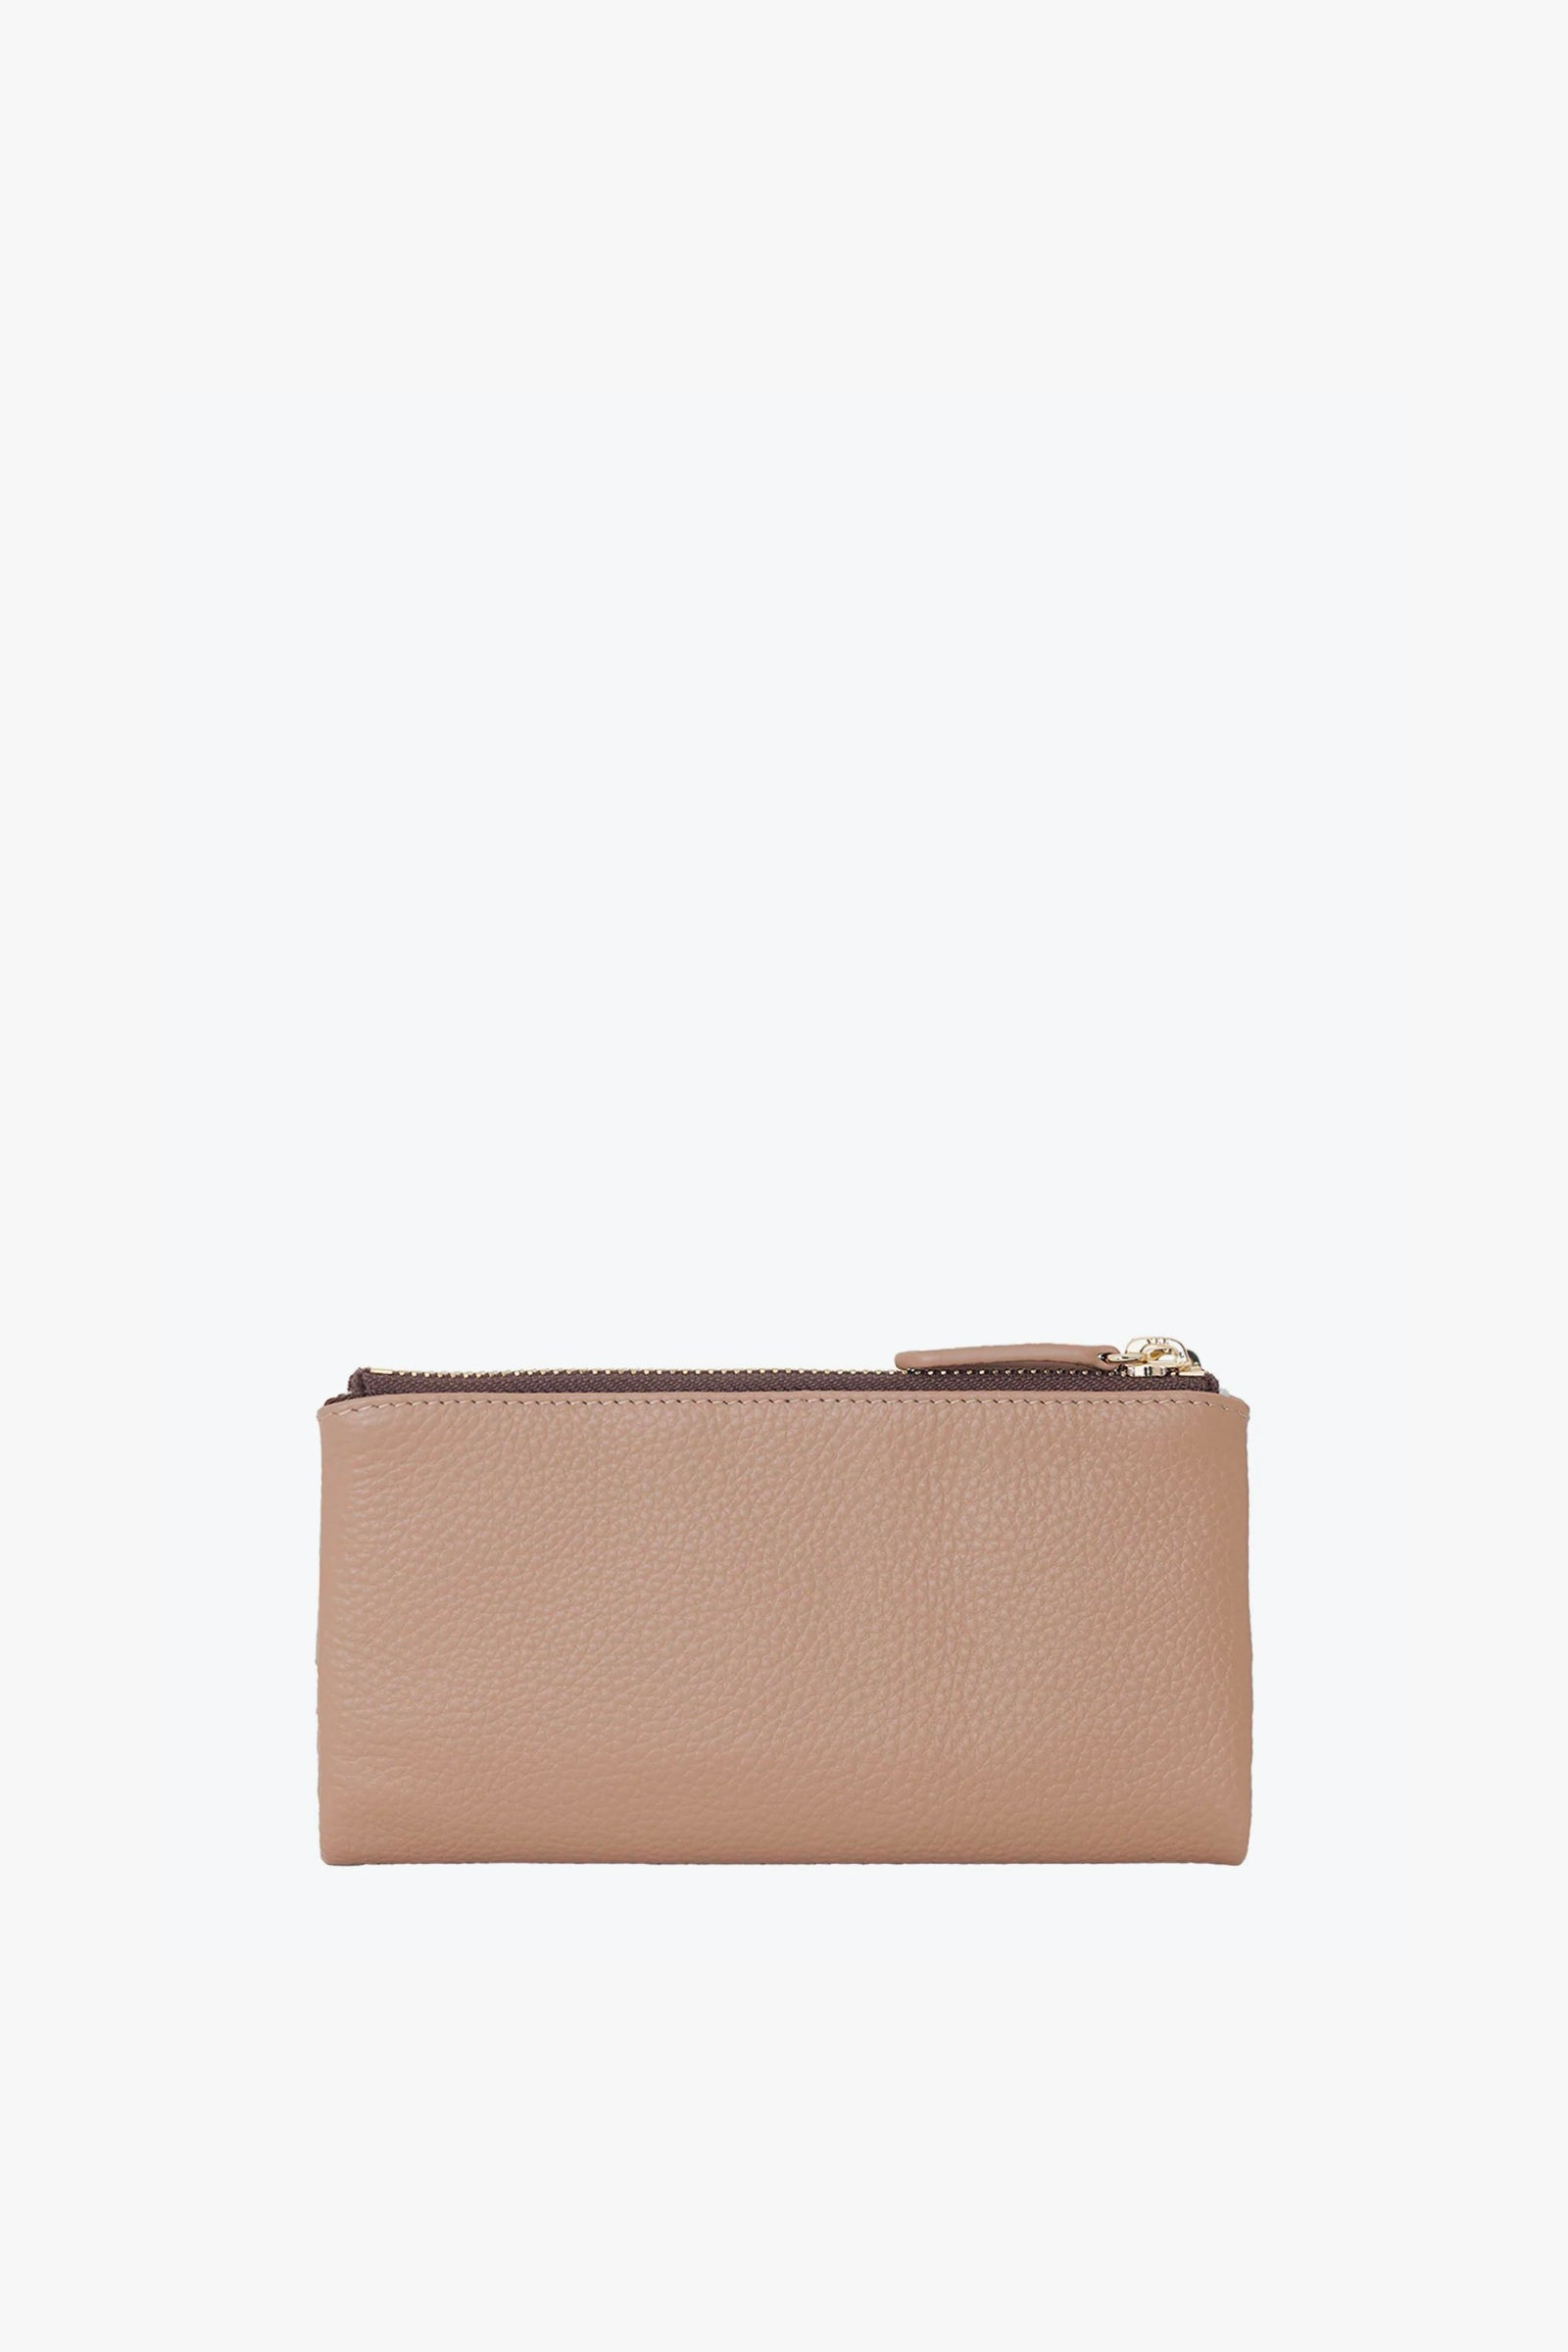 SAM WALLET - TAUPE